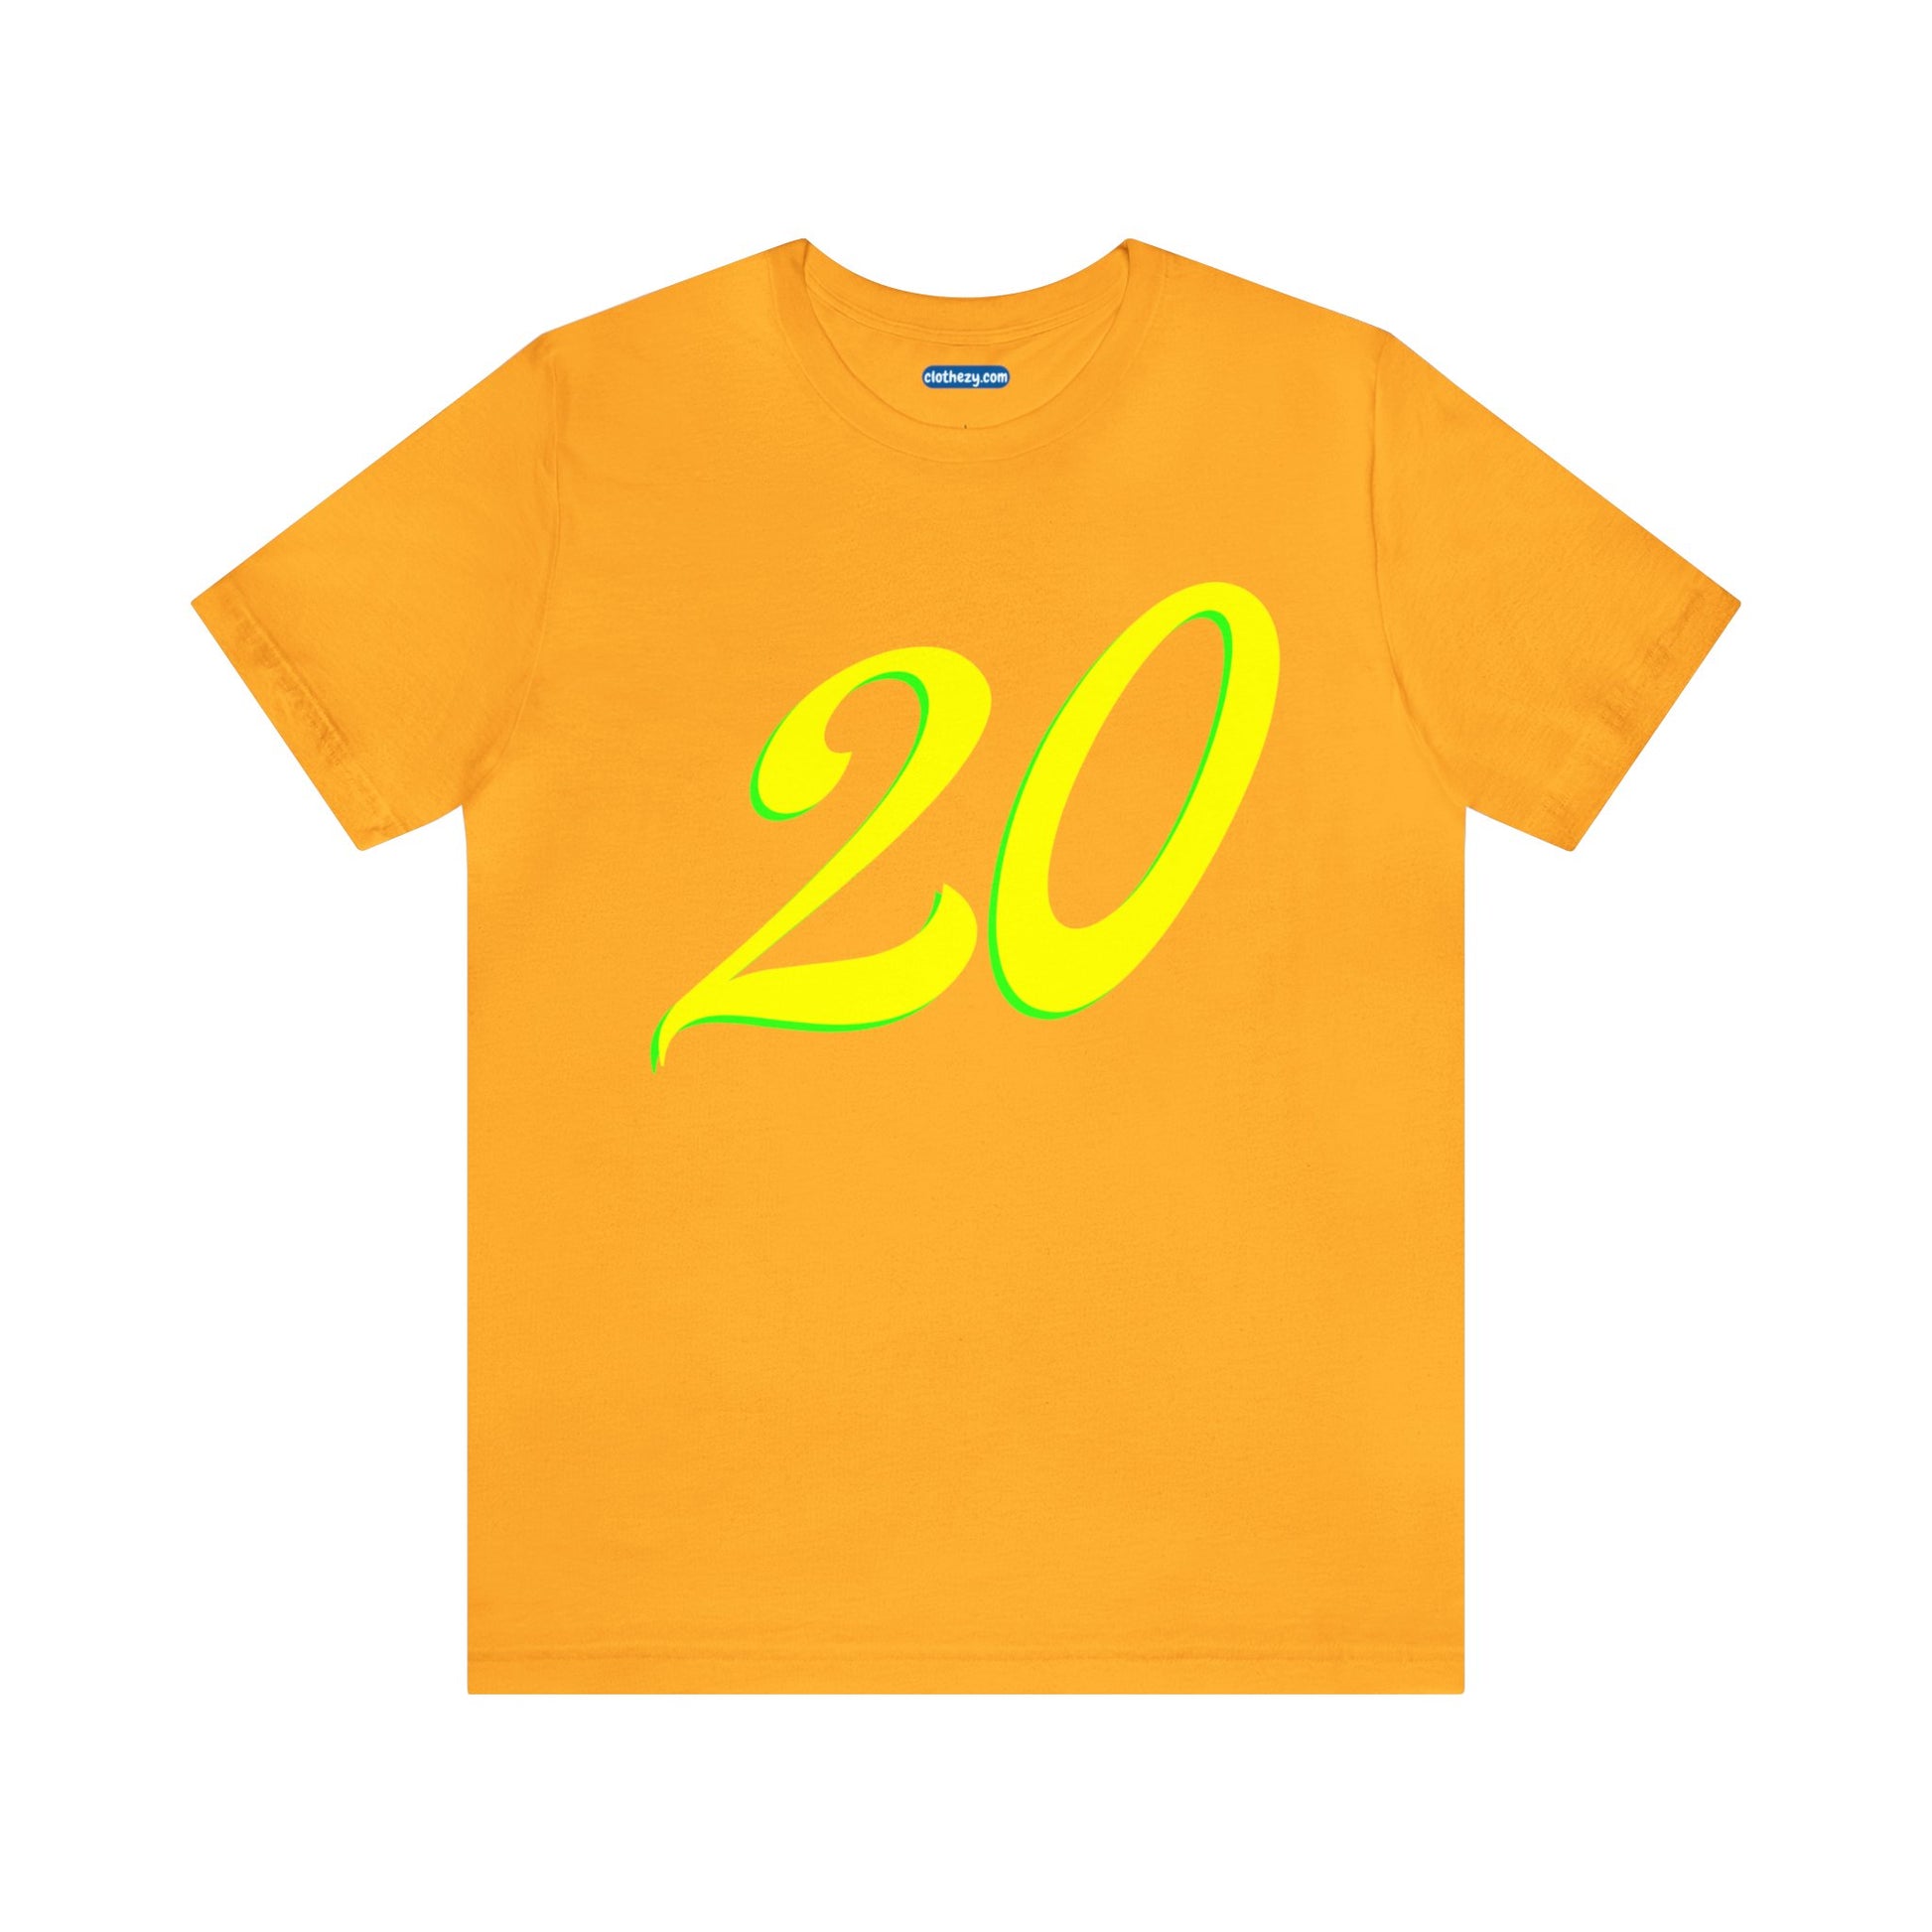 Number 20 Design - Soft Cotton Tee for birthdays and celebrations, Gift for friends and family, Multiple Options by clothezy.com in Green Heather Size Small - Buy Now